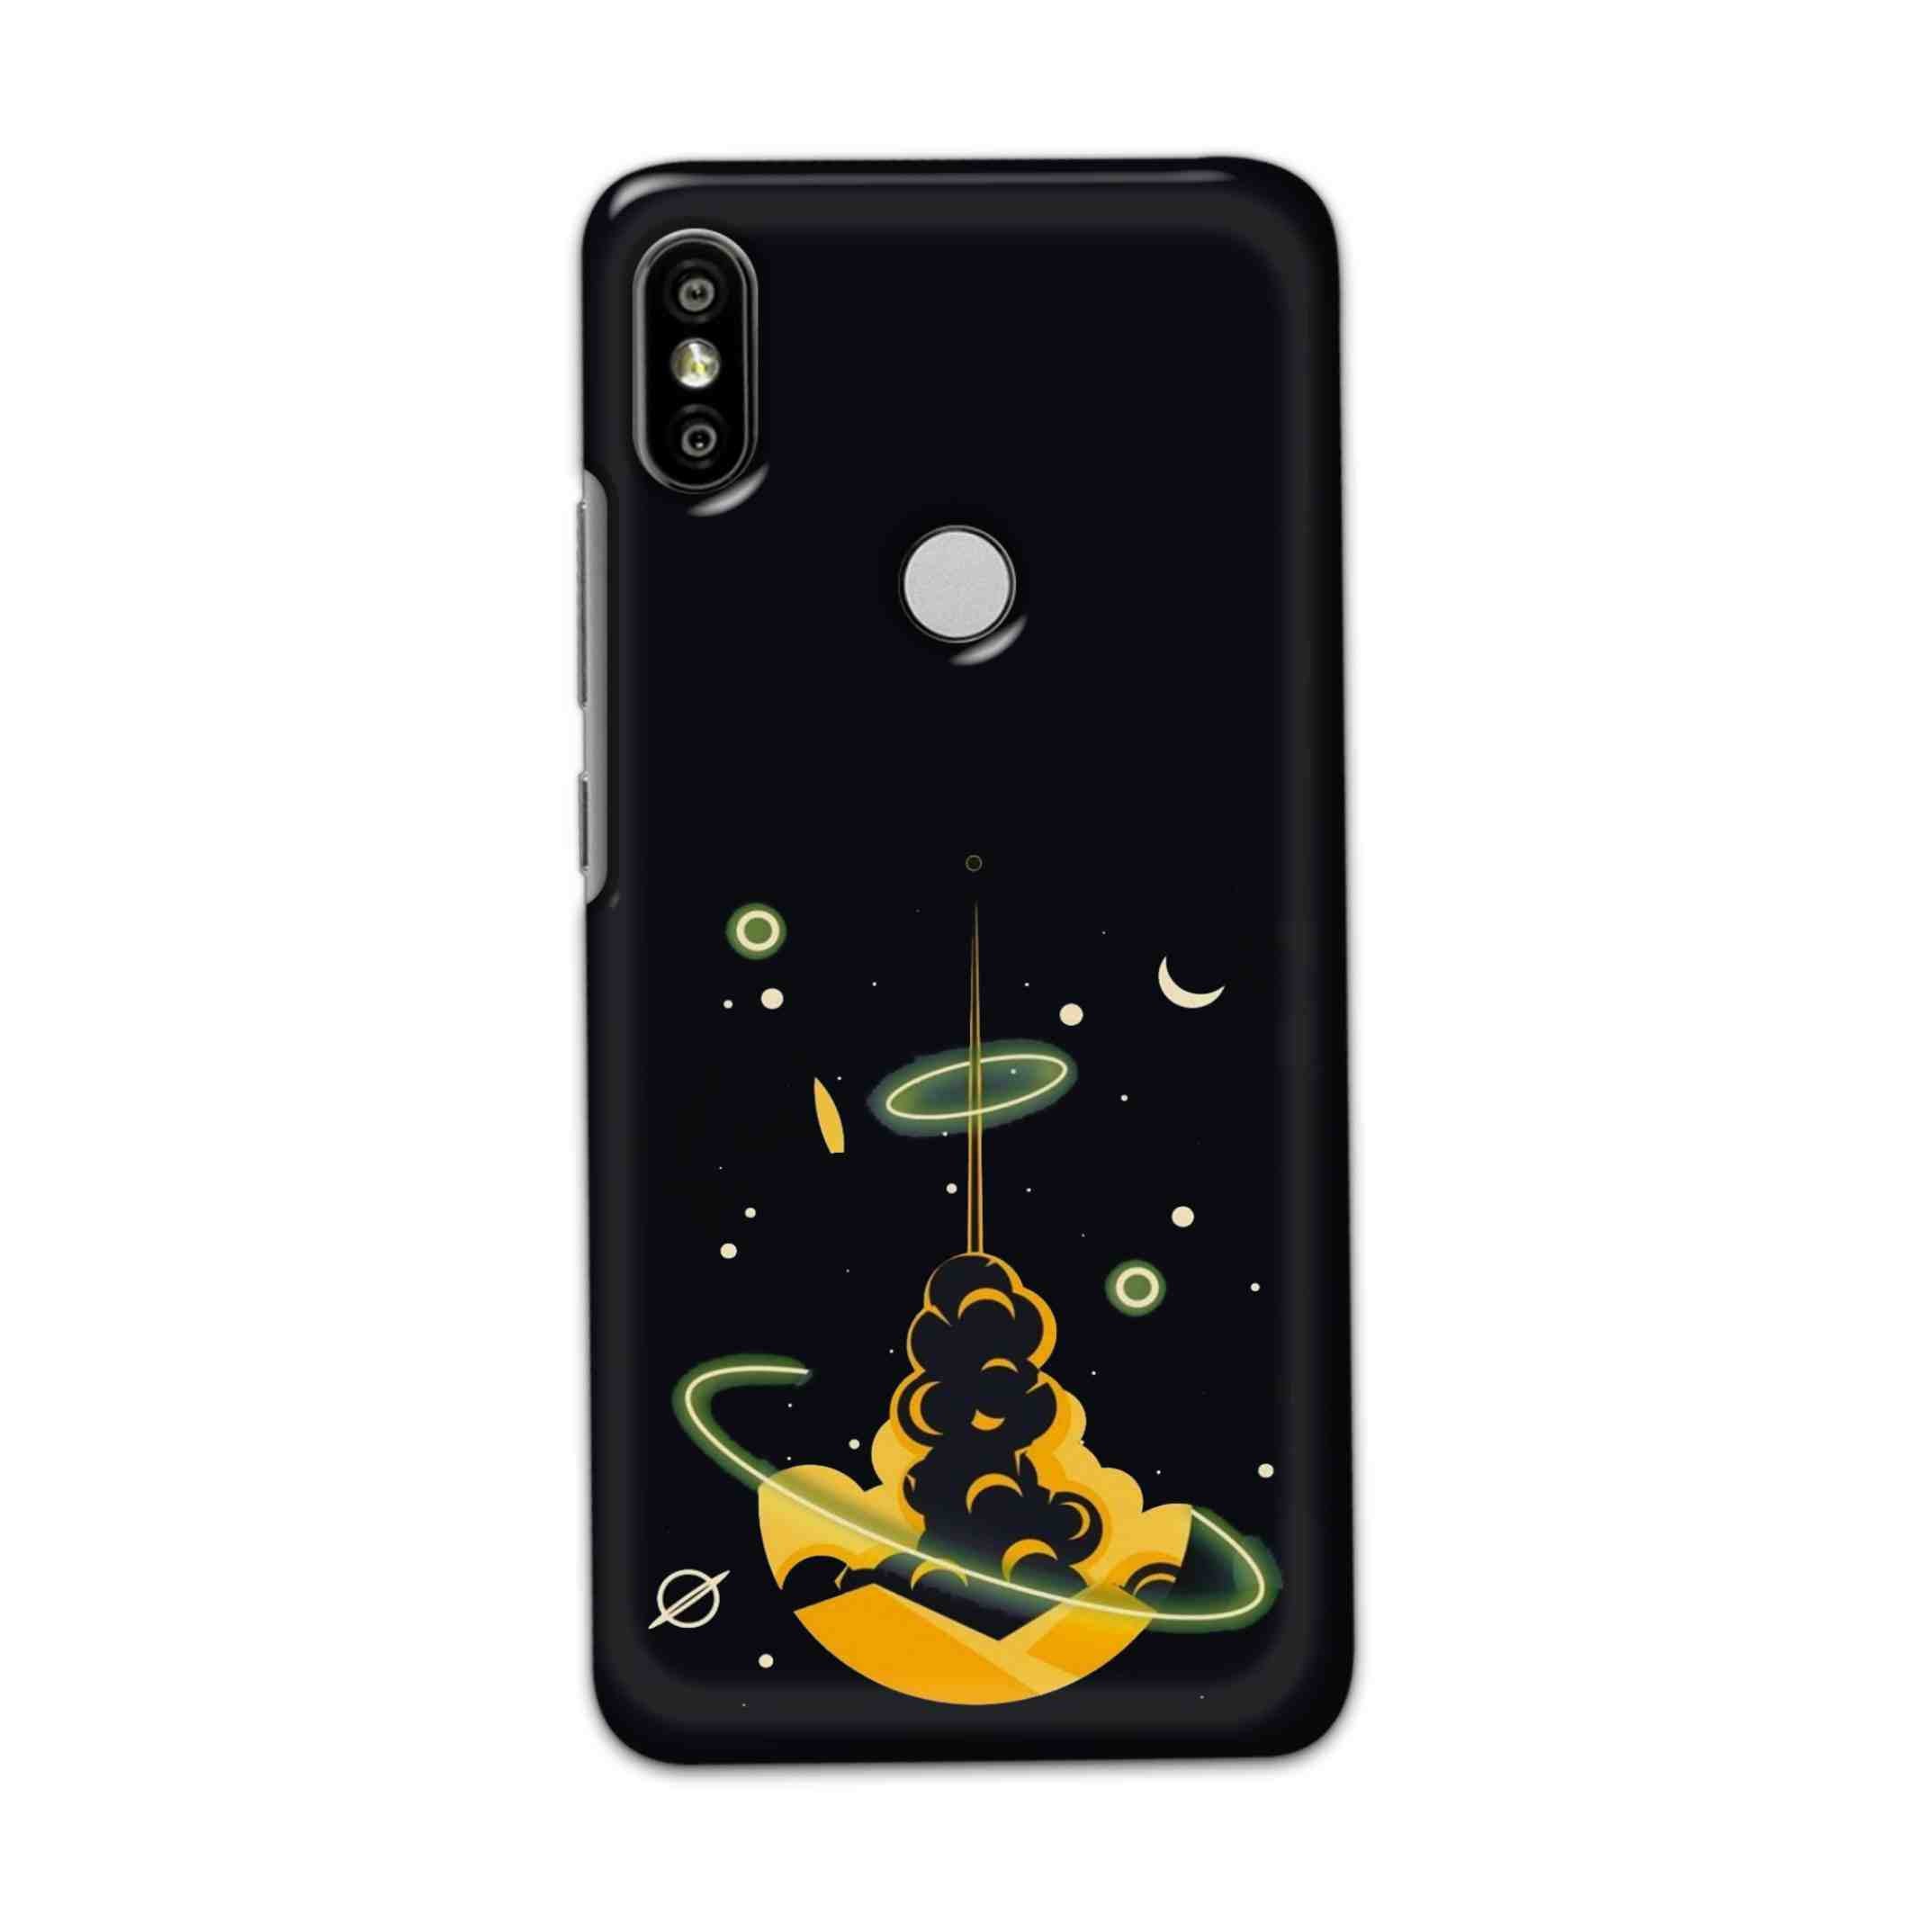 Buy Moon Hard Back Mobile Phone Case Cover For Redmi S2 / Y2 Online